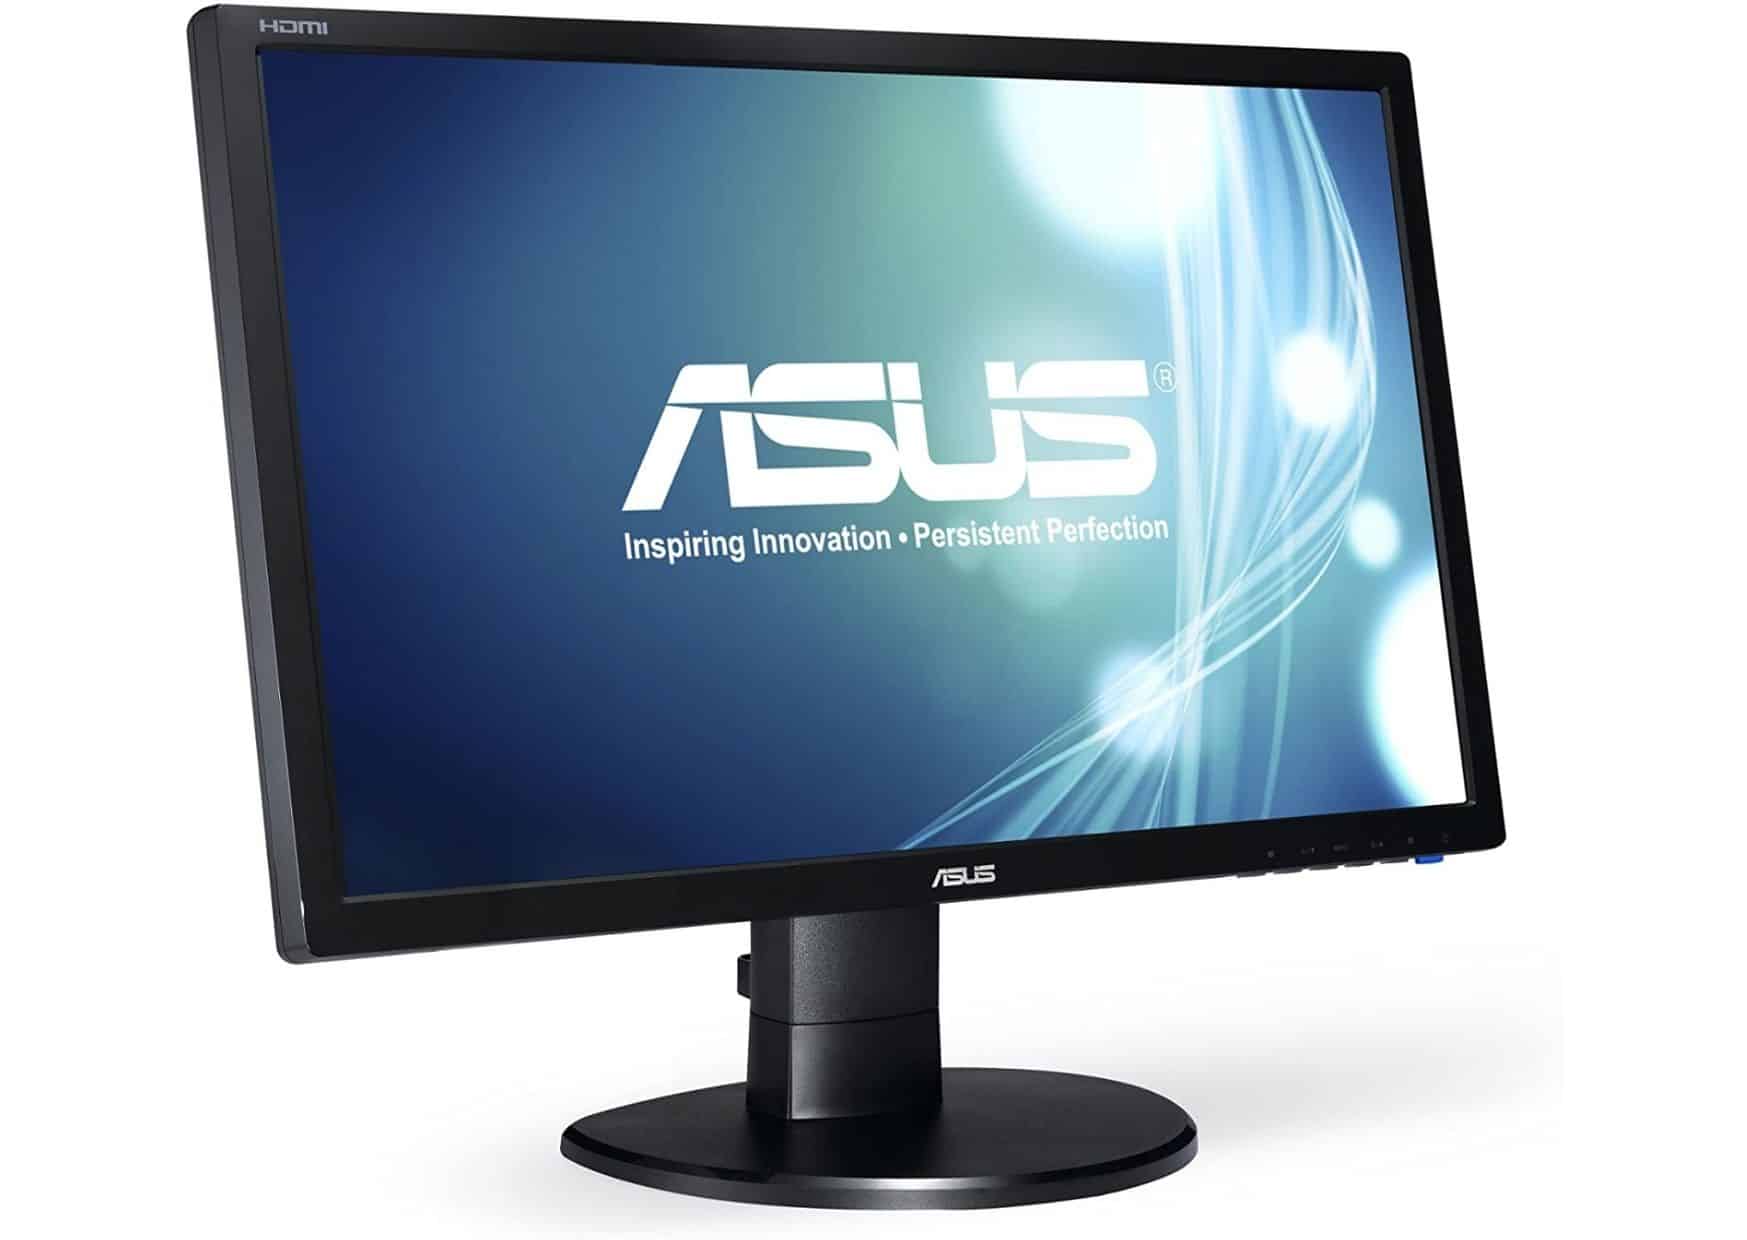 10 Best Monitors for Your PC Under $100